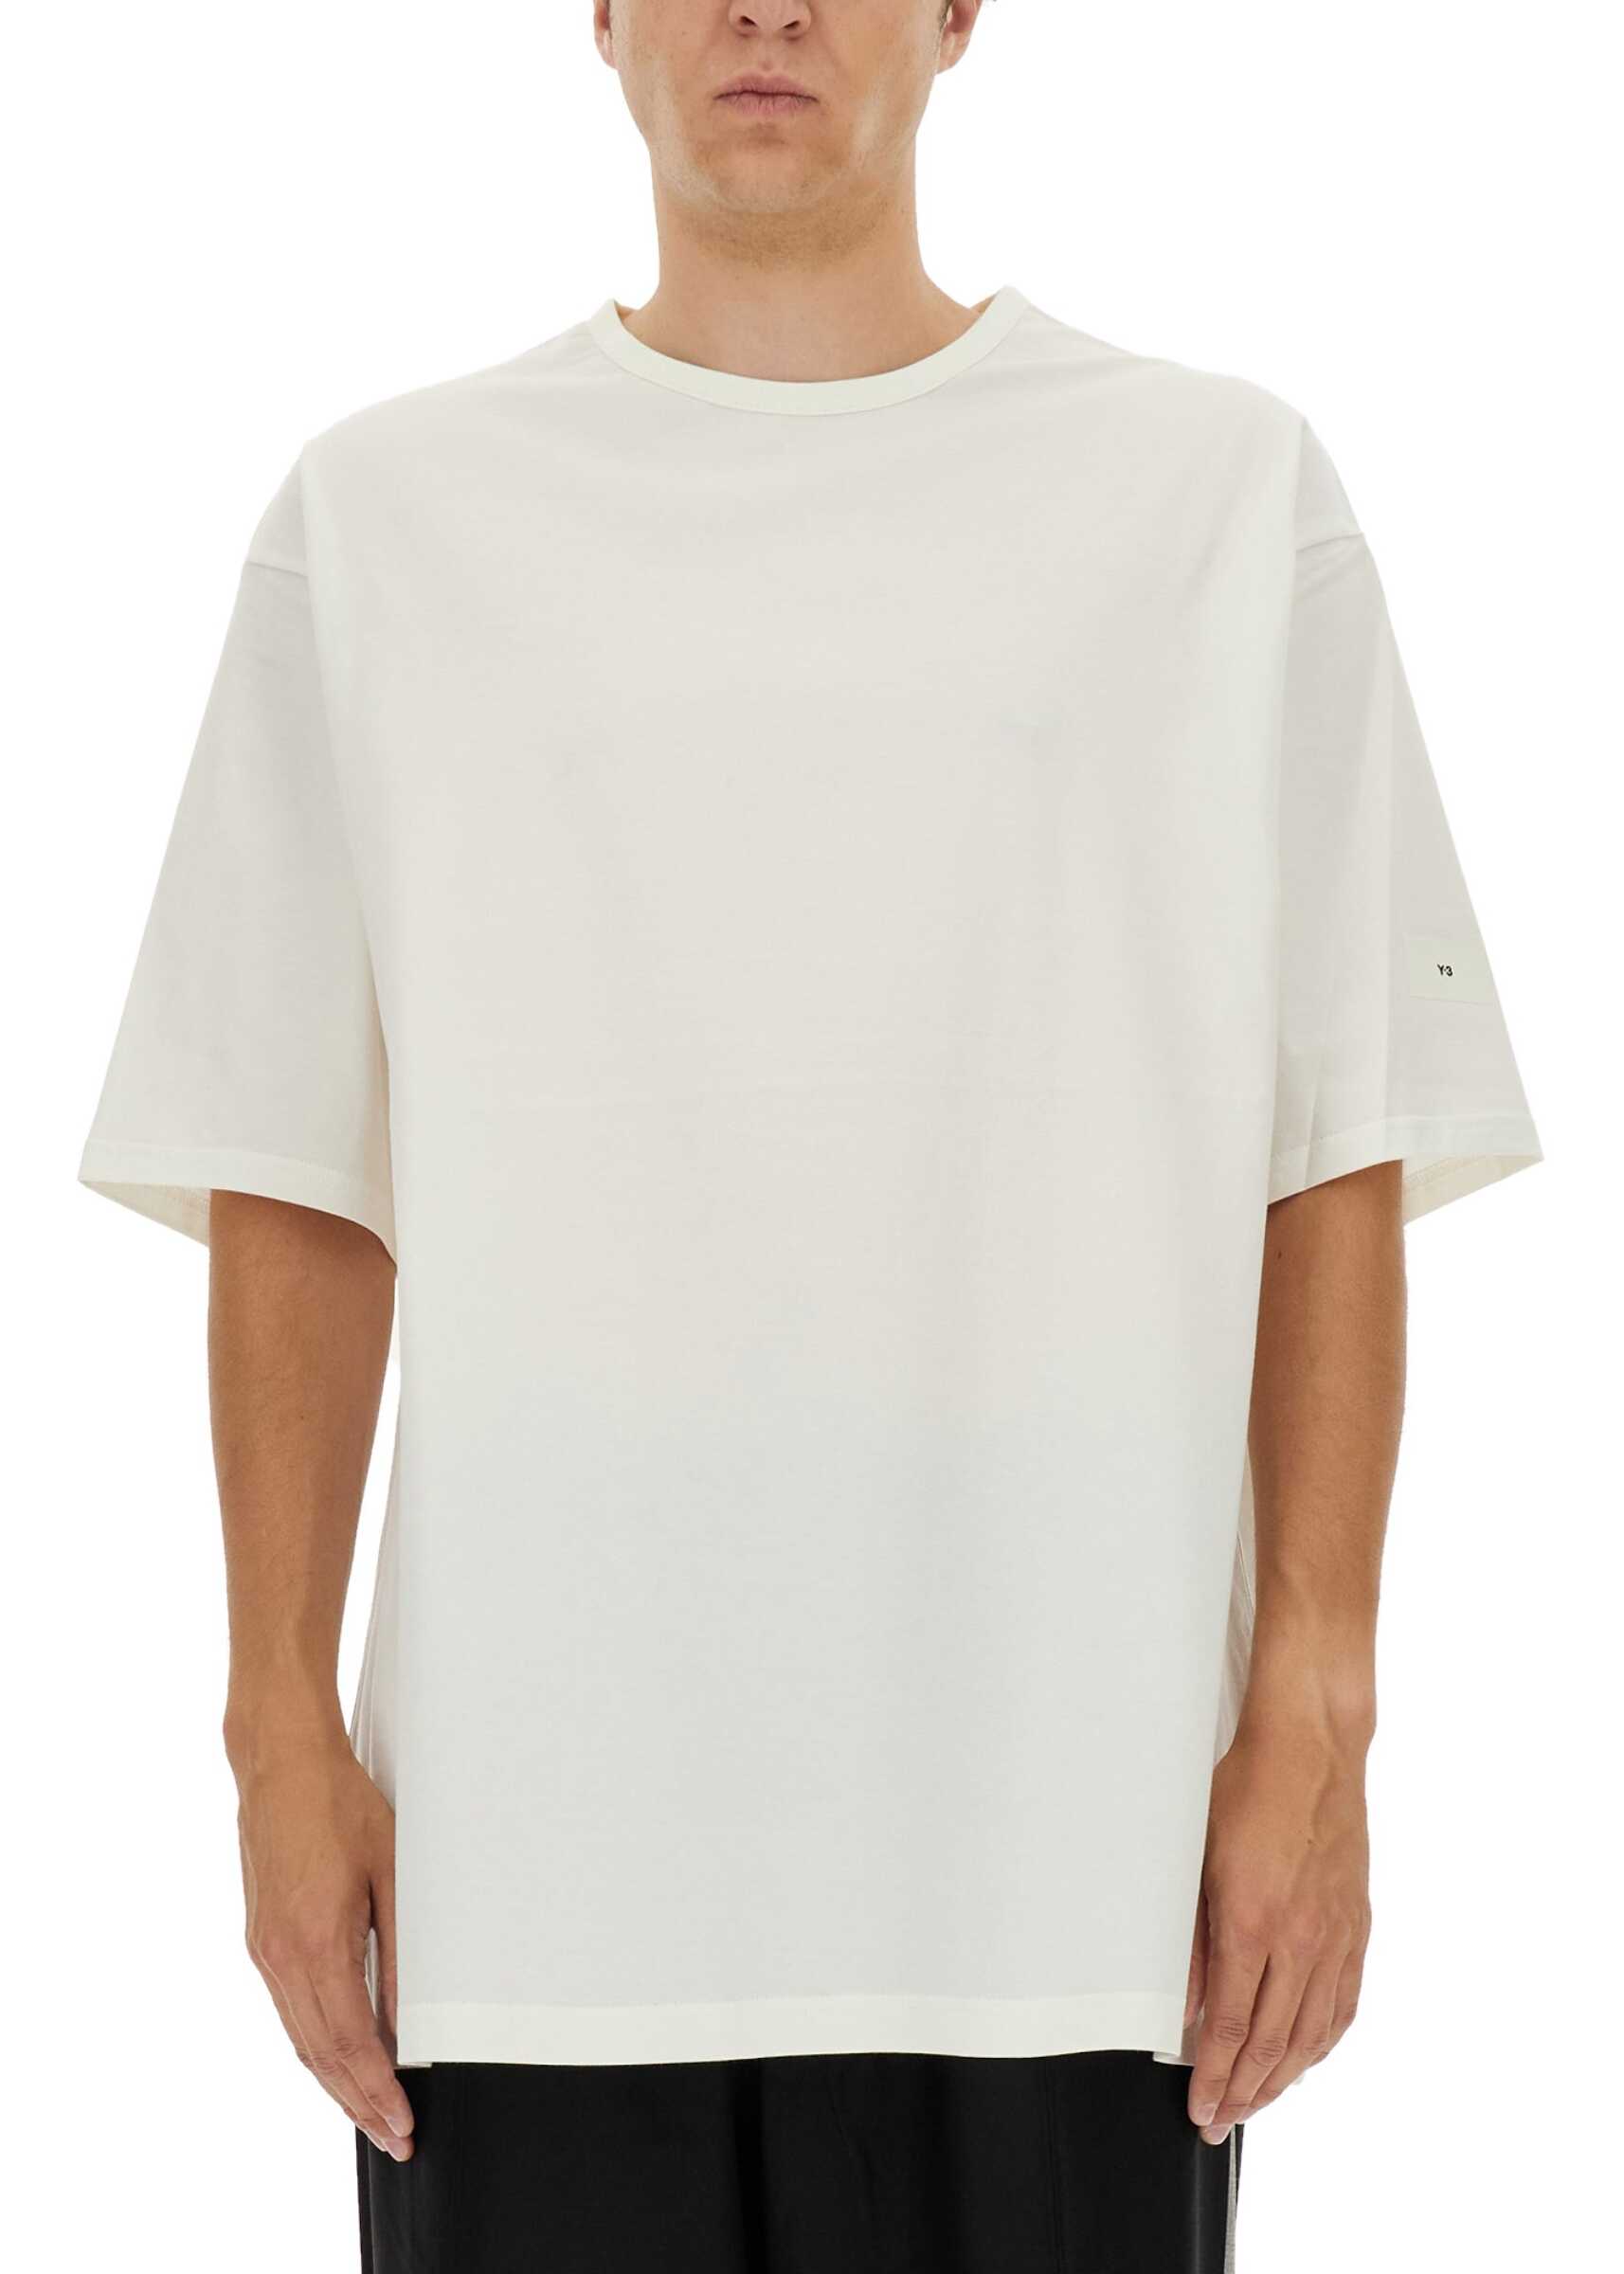 Y-3 Boxy Fit T-Shirt WHITE